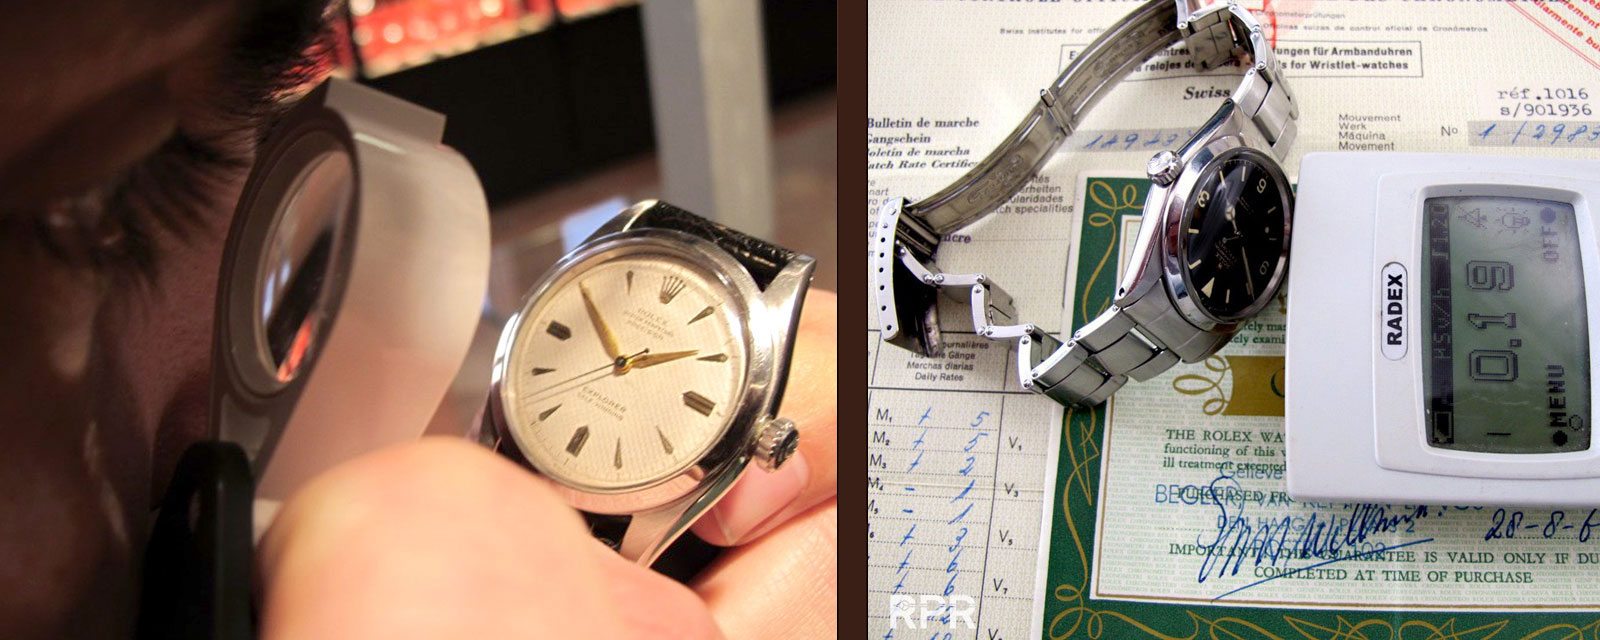 Pin by Vintage Contessa & Times Past on Rolex Watches